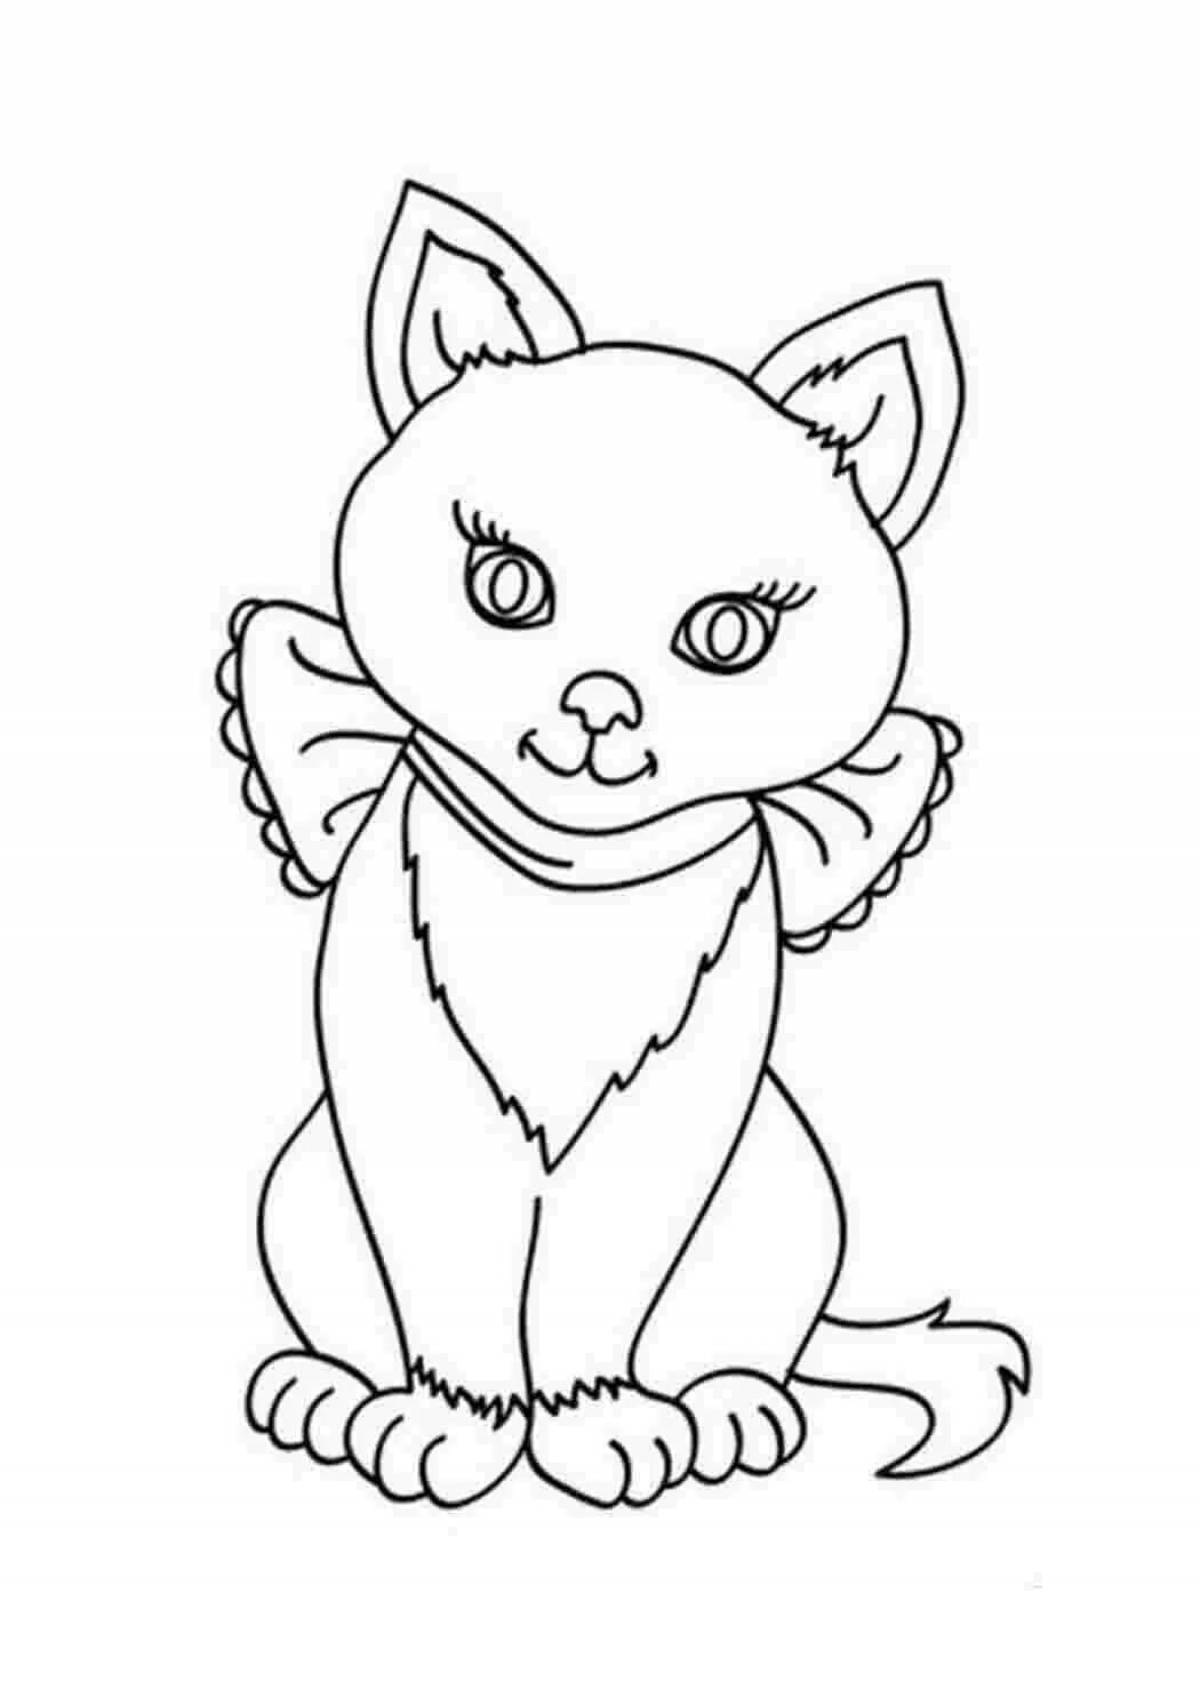 Coloring page hypnotic kitten